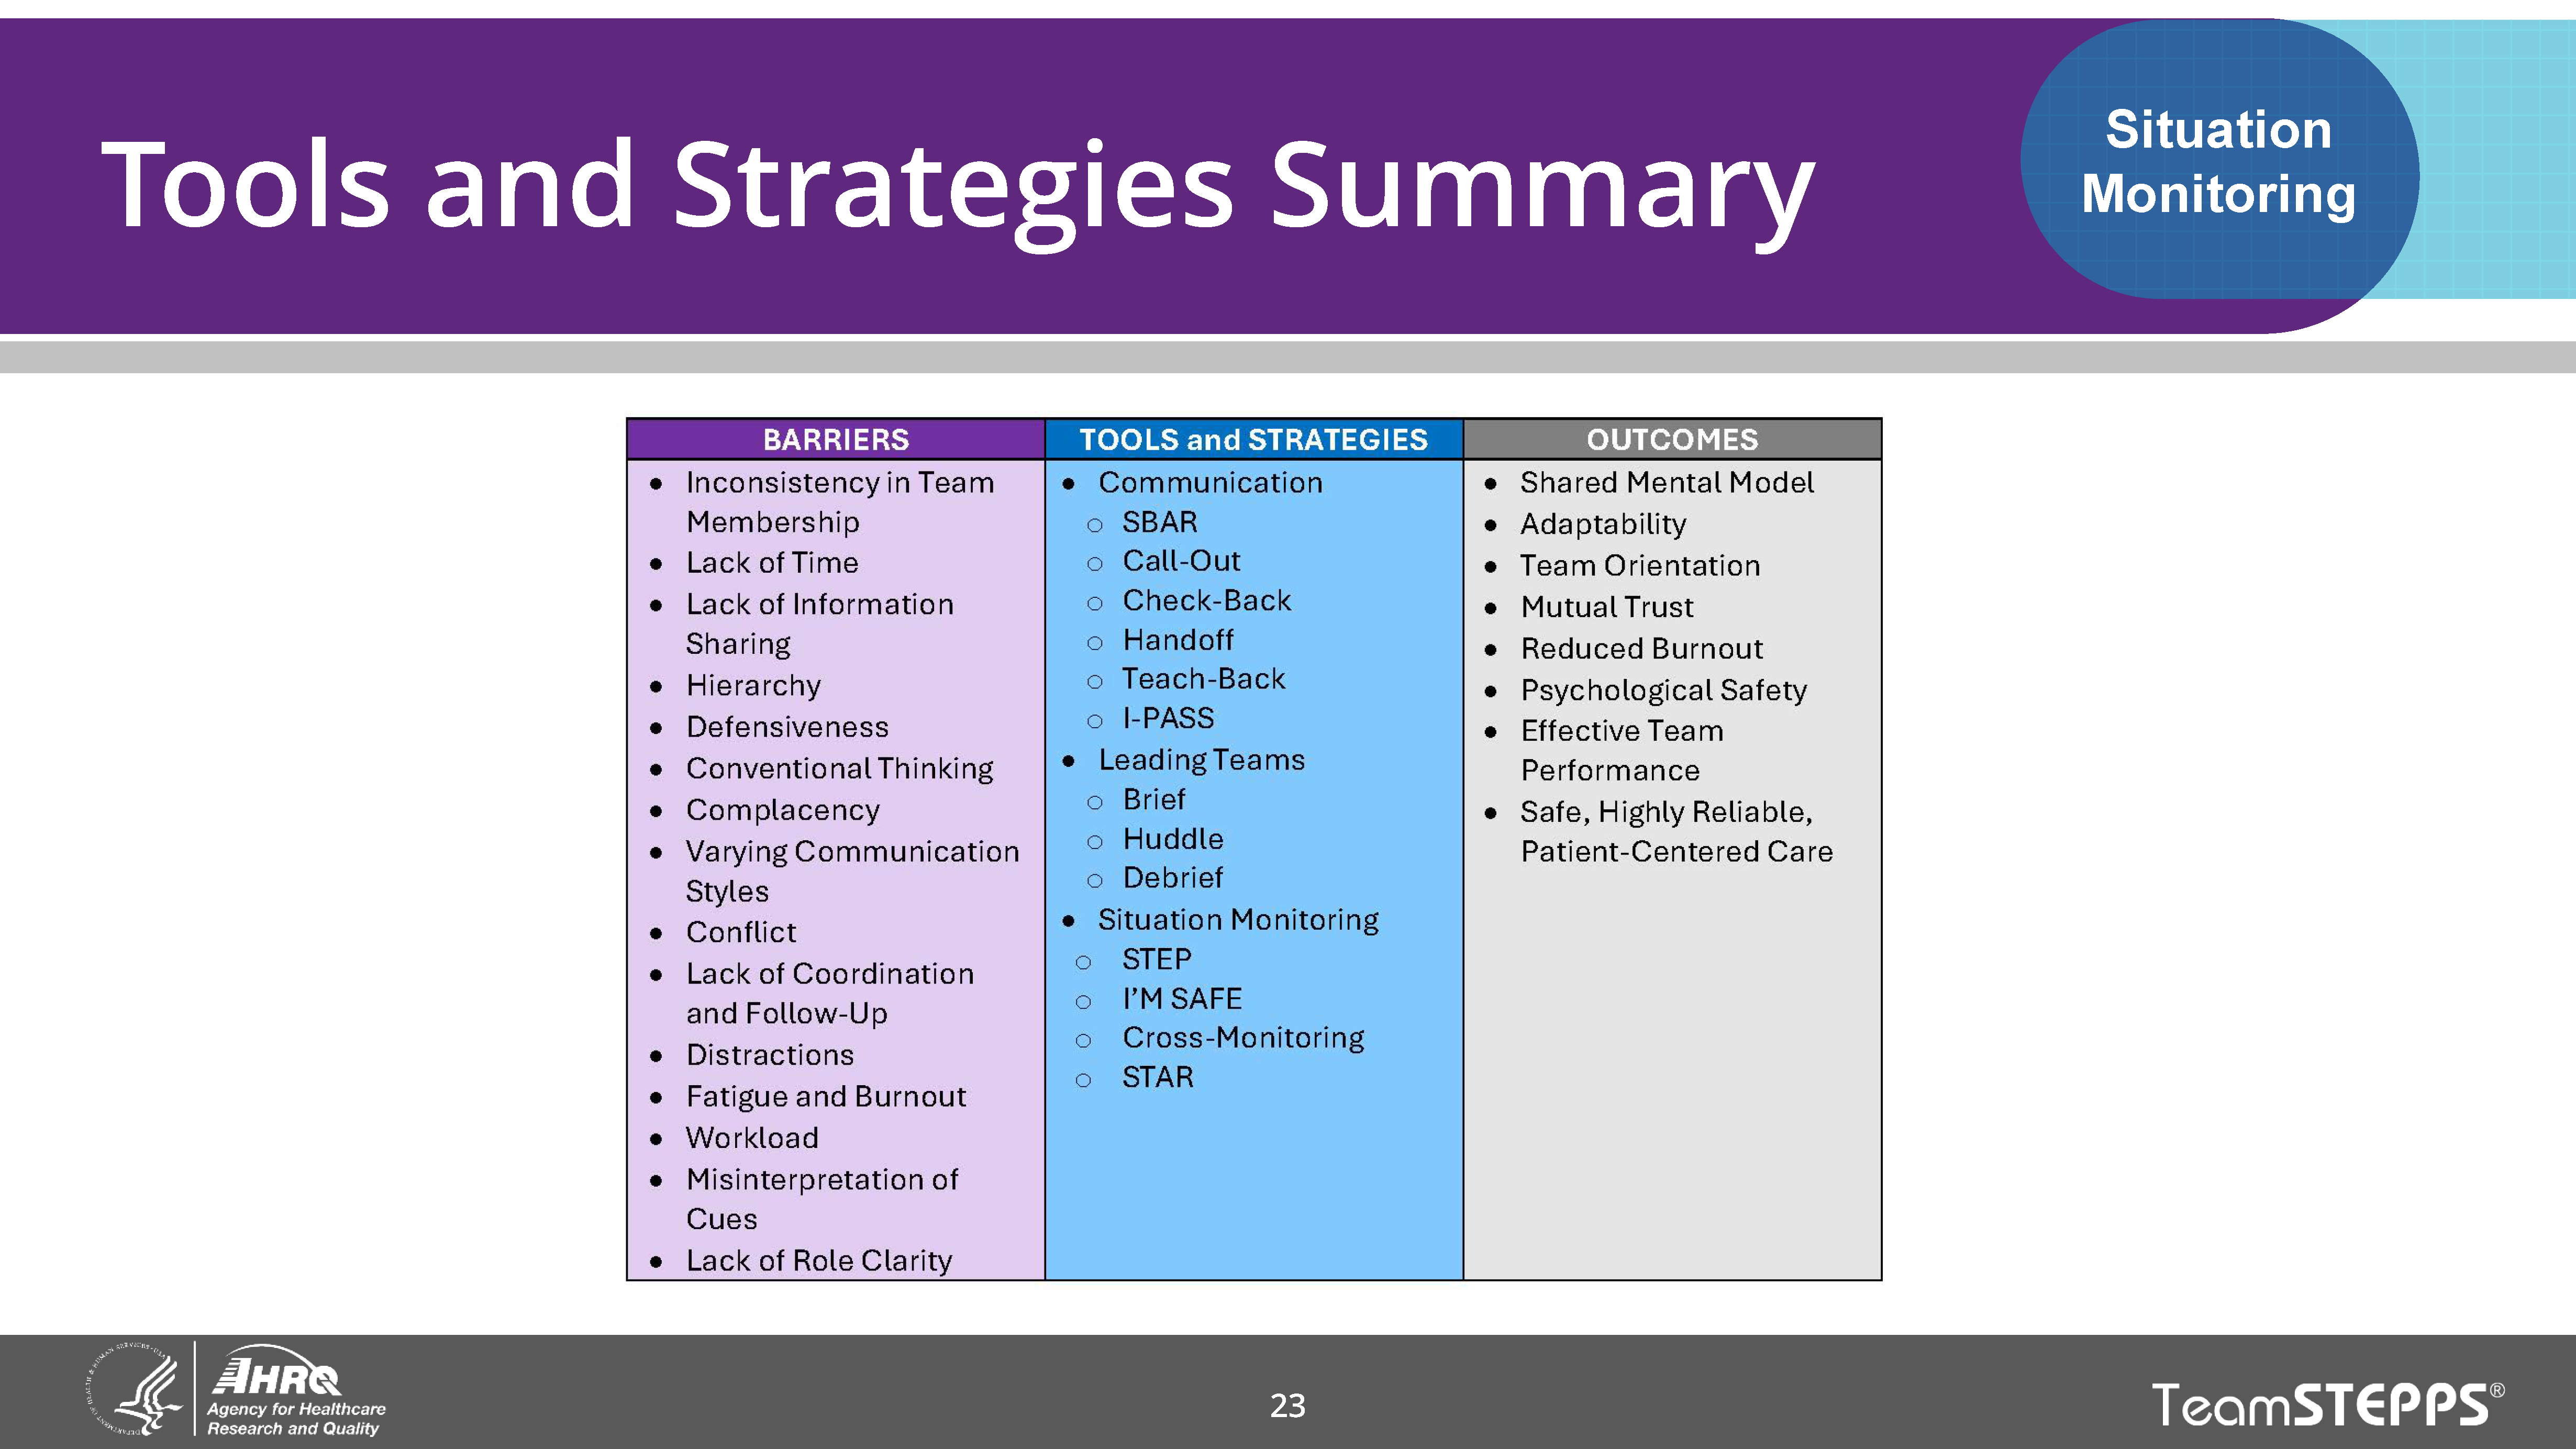 Image of slide: Using situation monitoring tools and strategies helps teams overcome barriers and achieve desired outcomes.